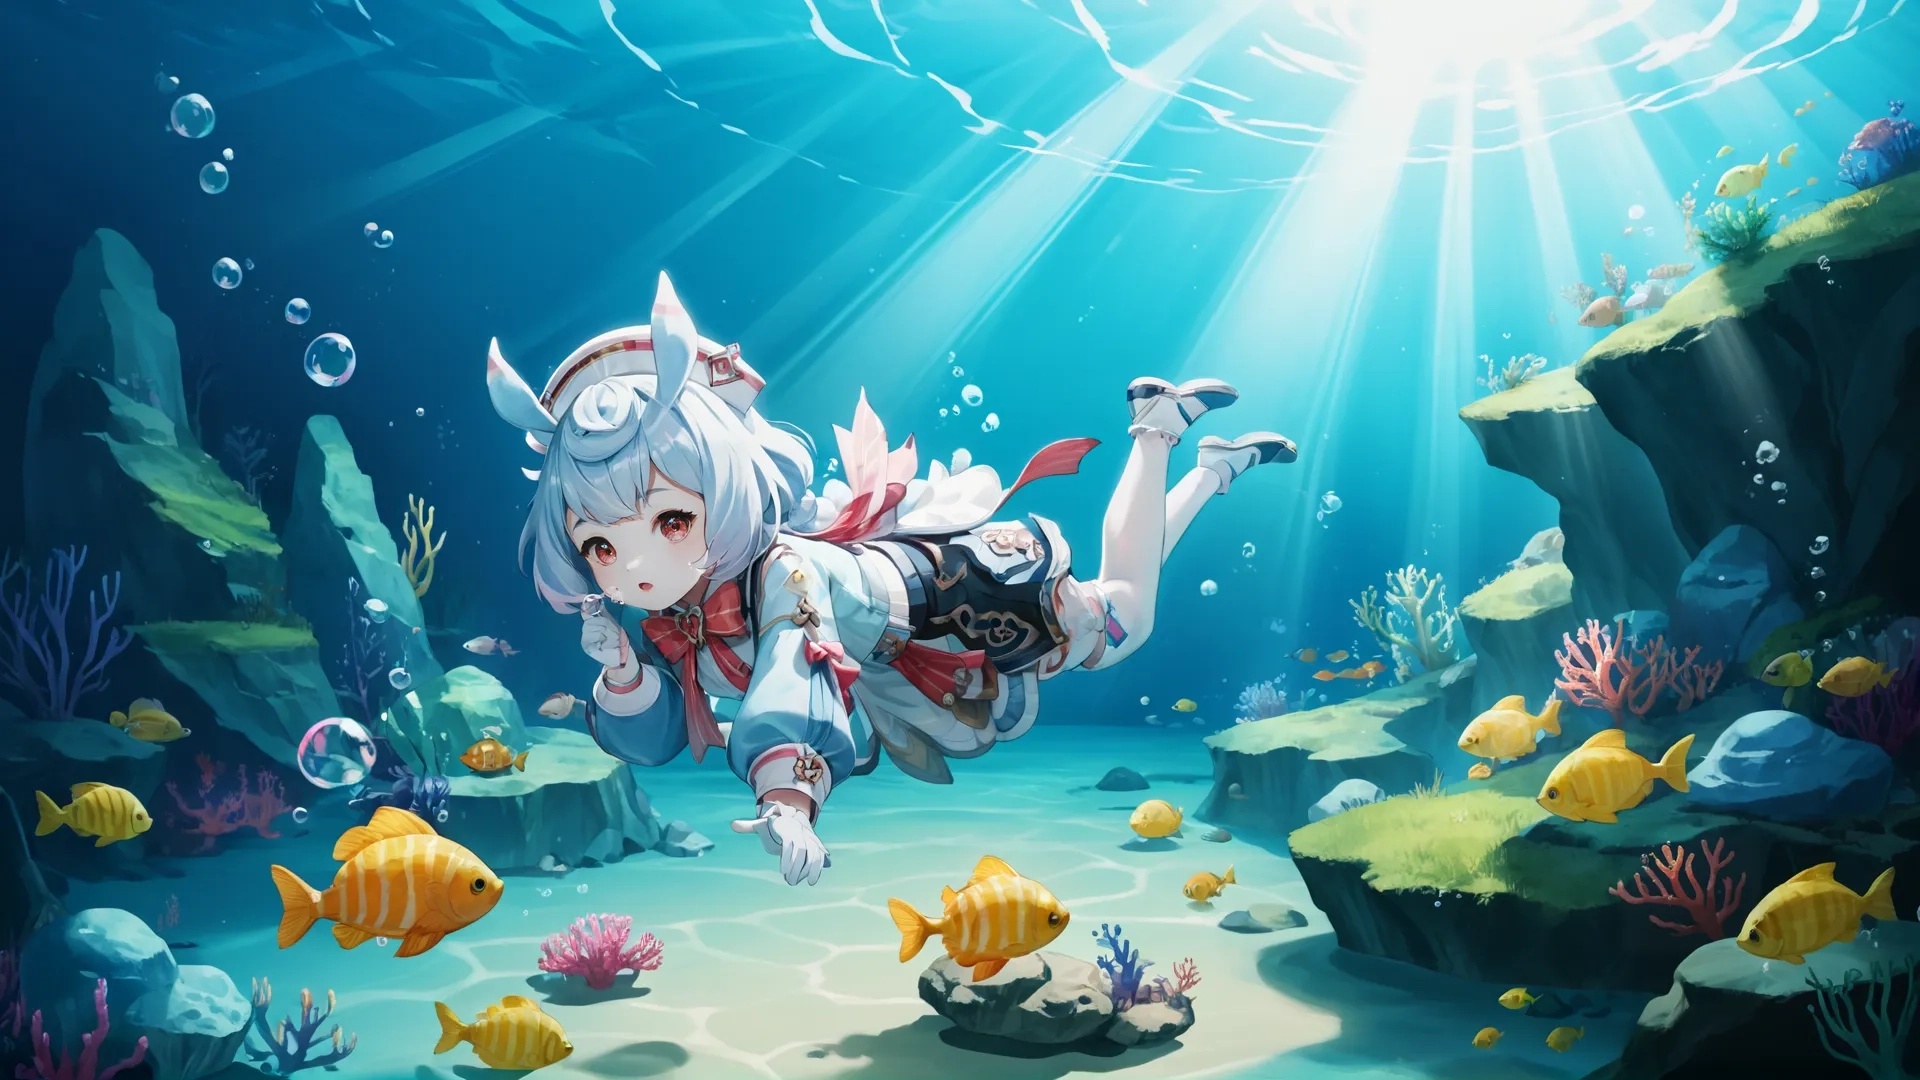 anime princesses scuba in underwater scenes surrounded by coral and other inhabitants in deep blue sea water with fish in it
